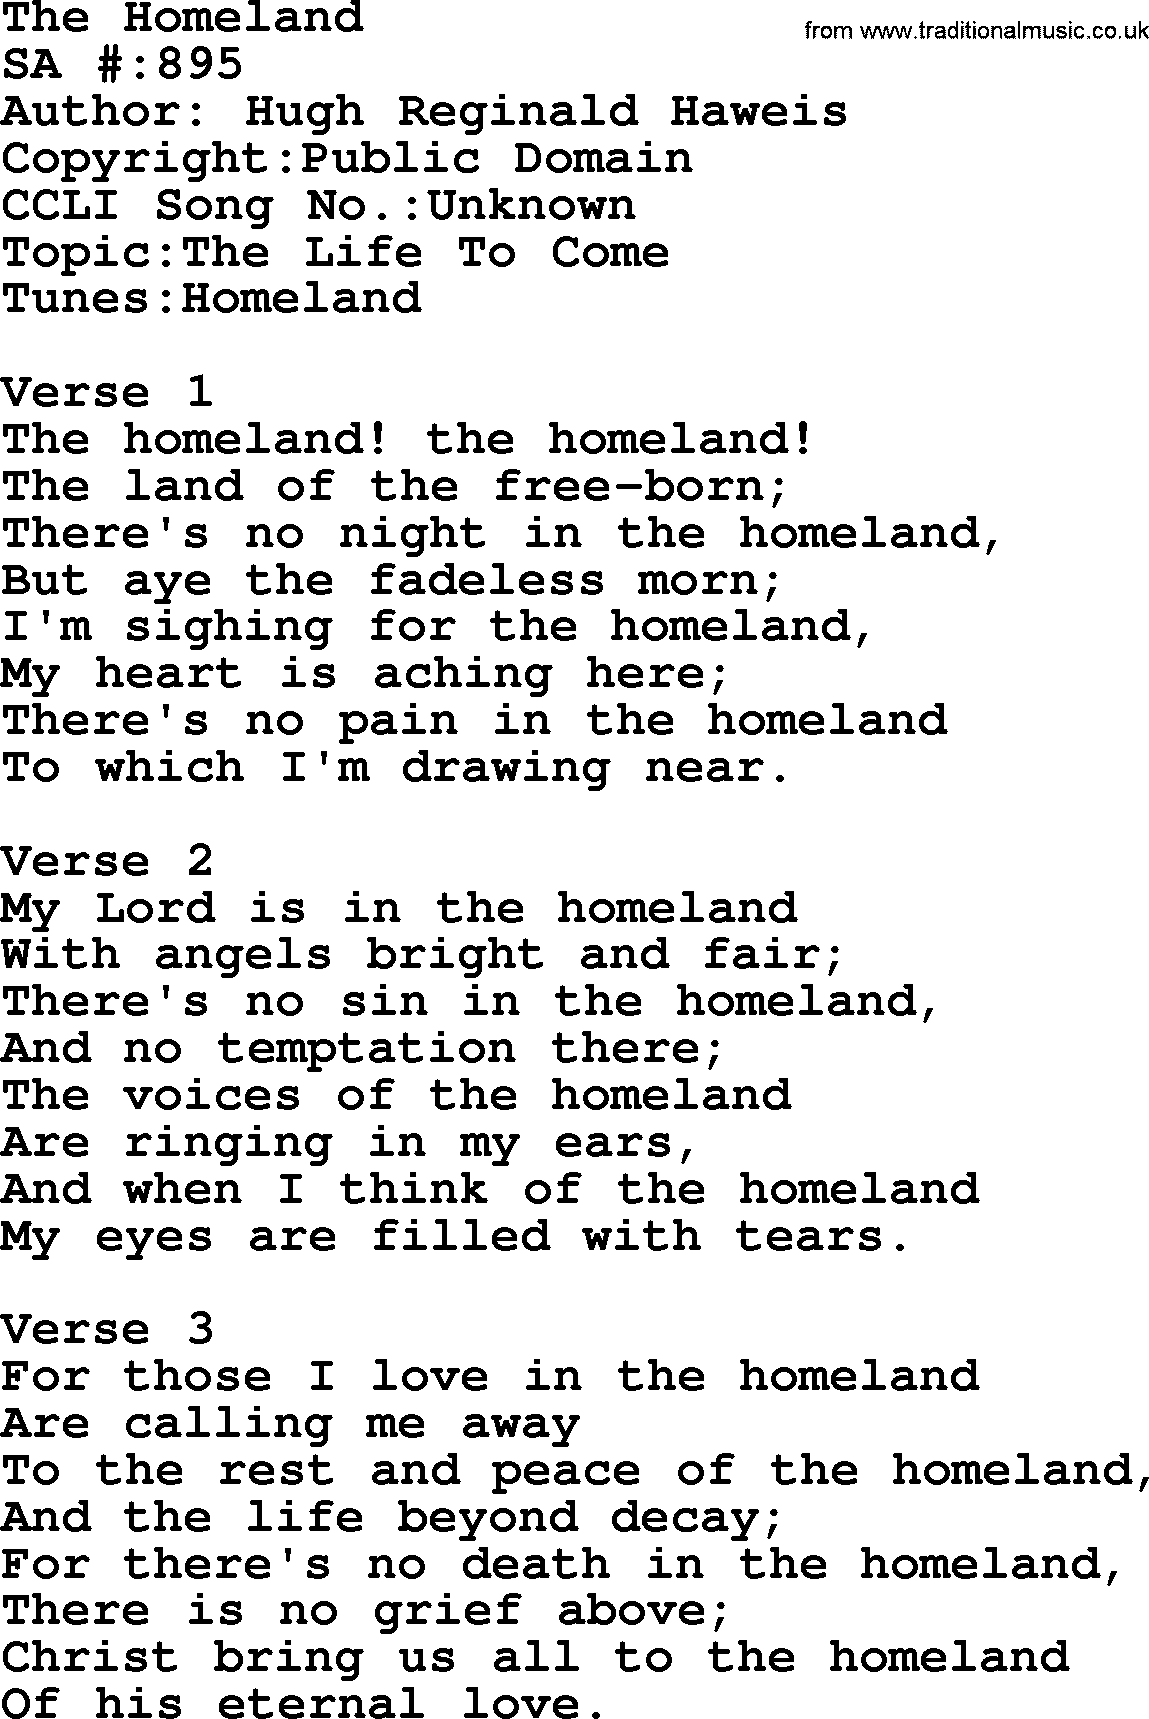 Salvation Army Hymnal, title: The Homeland, with lyrics and PDF,